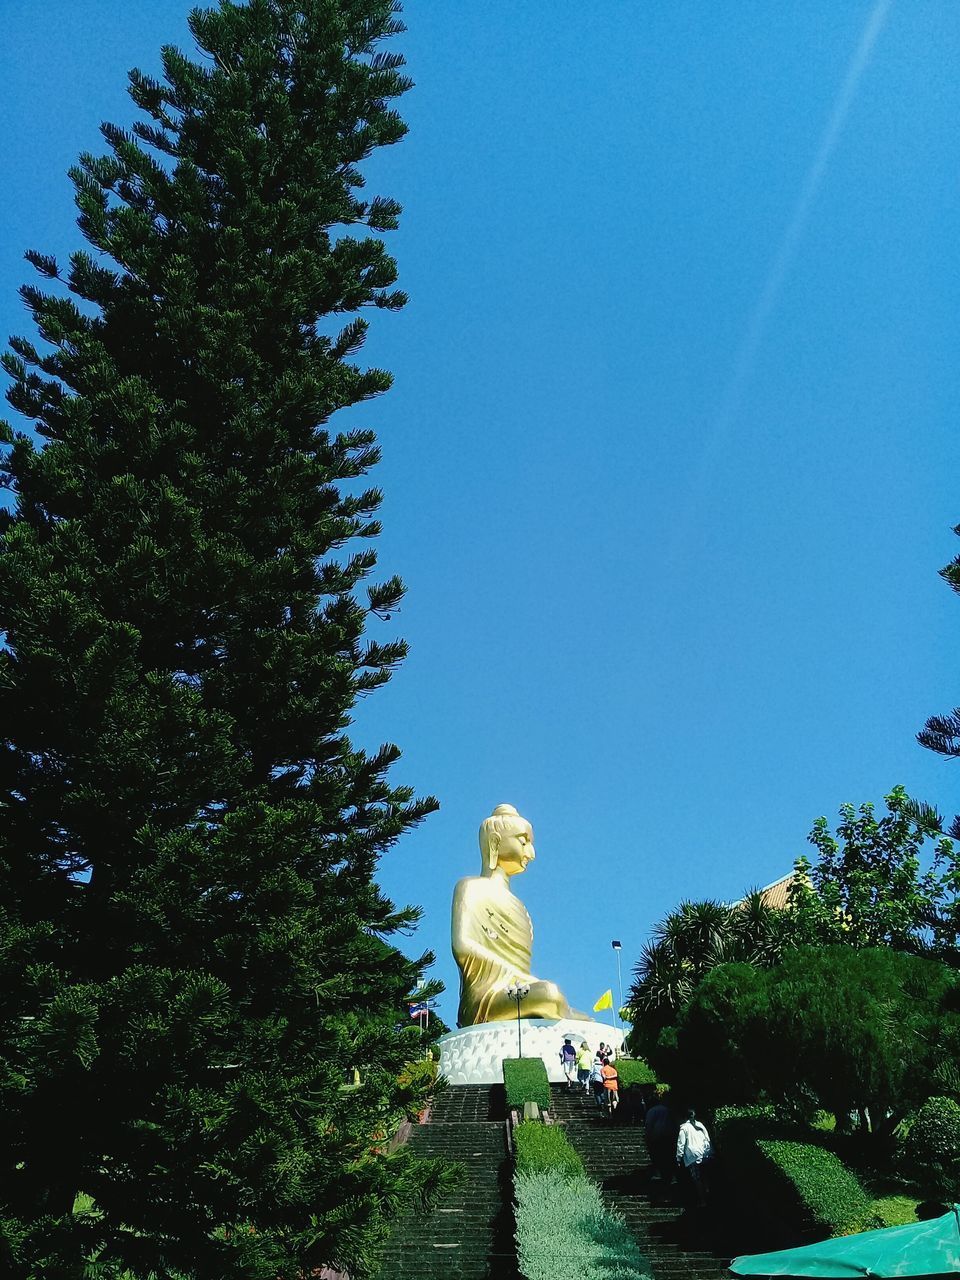 LOW ANGLE VIEW OF STATUES AGAINST CLEAR BLUE SKY